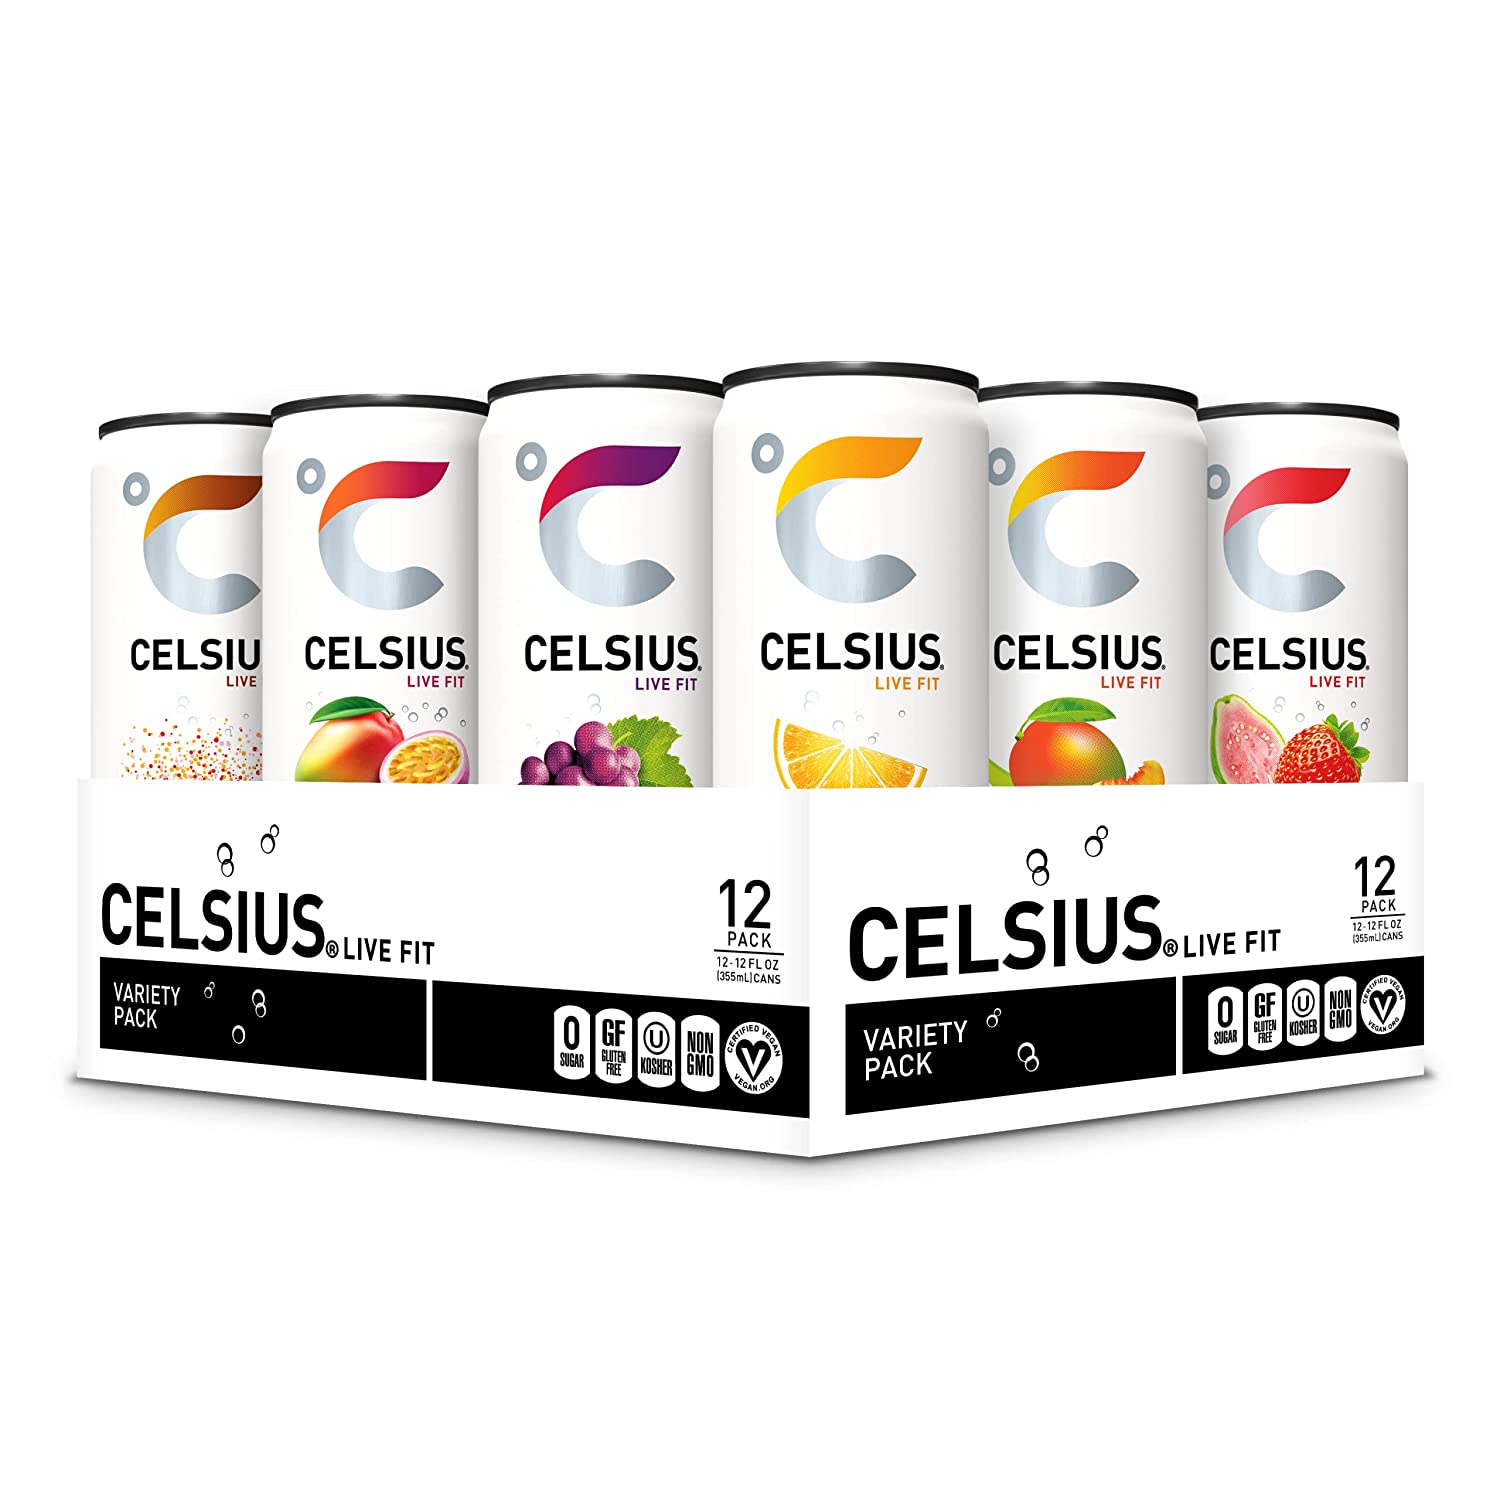 CELSIUS Assorted Flavors Official Variety Pack, Functional Essential Energy Drinks, 12 Fl Oz (Pack of 12 $18.35